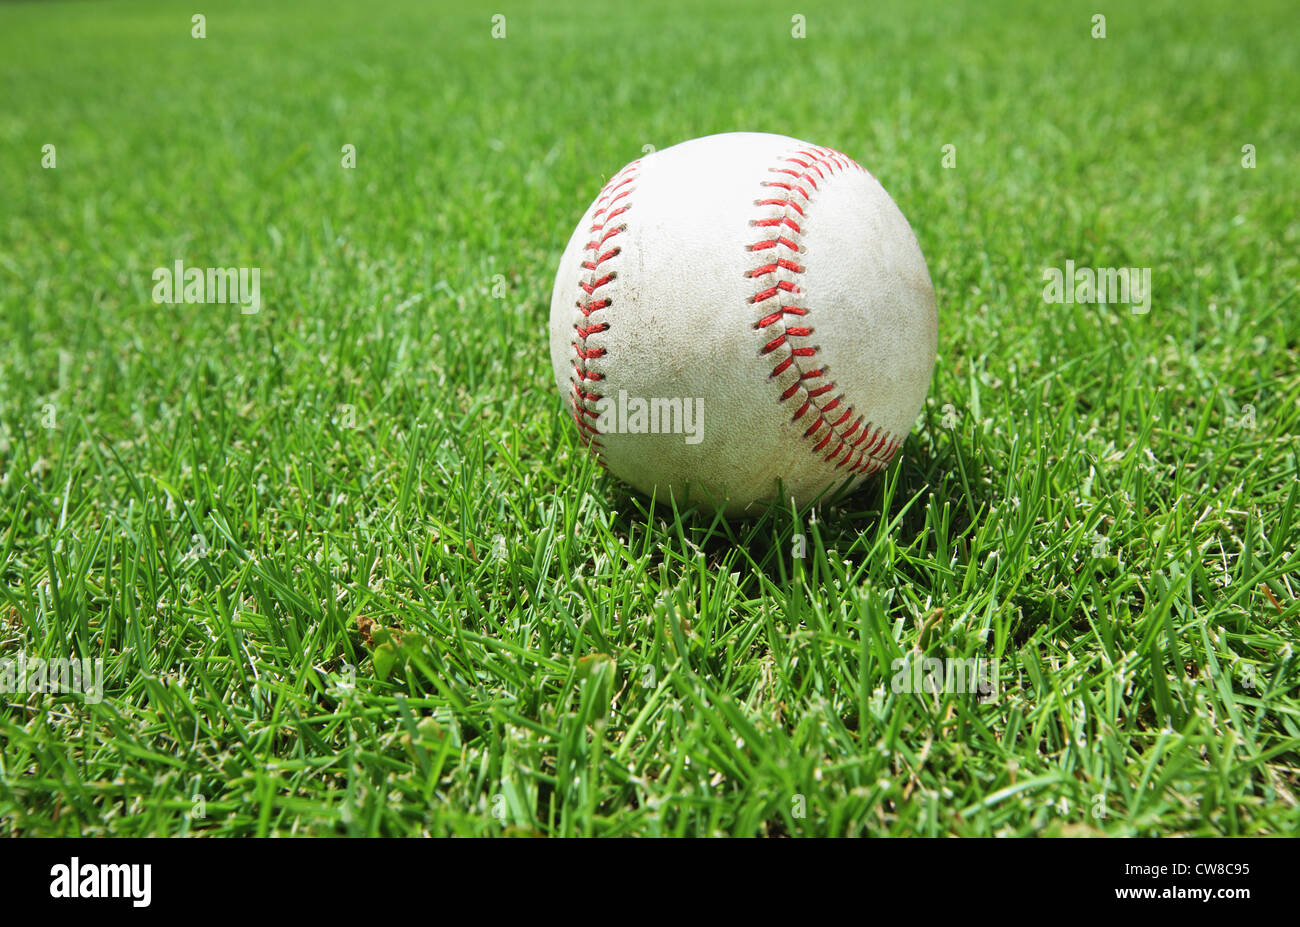 Le Cricket Ball On Grass Banque D'Images